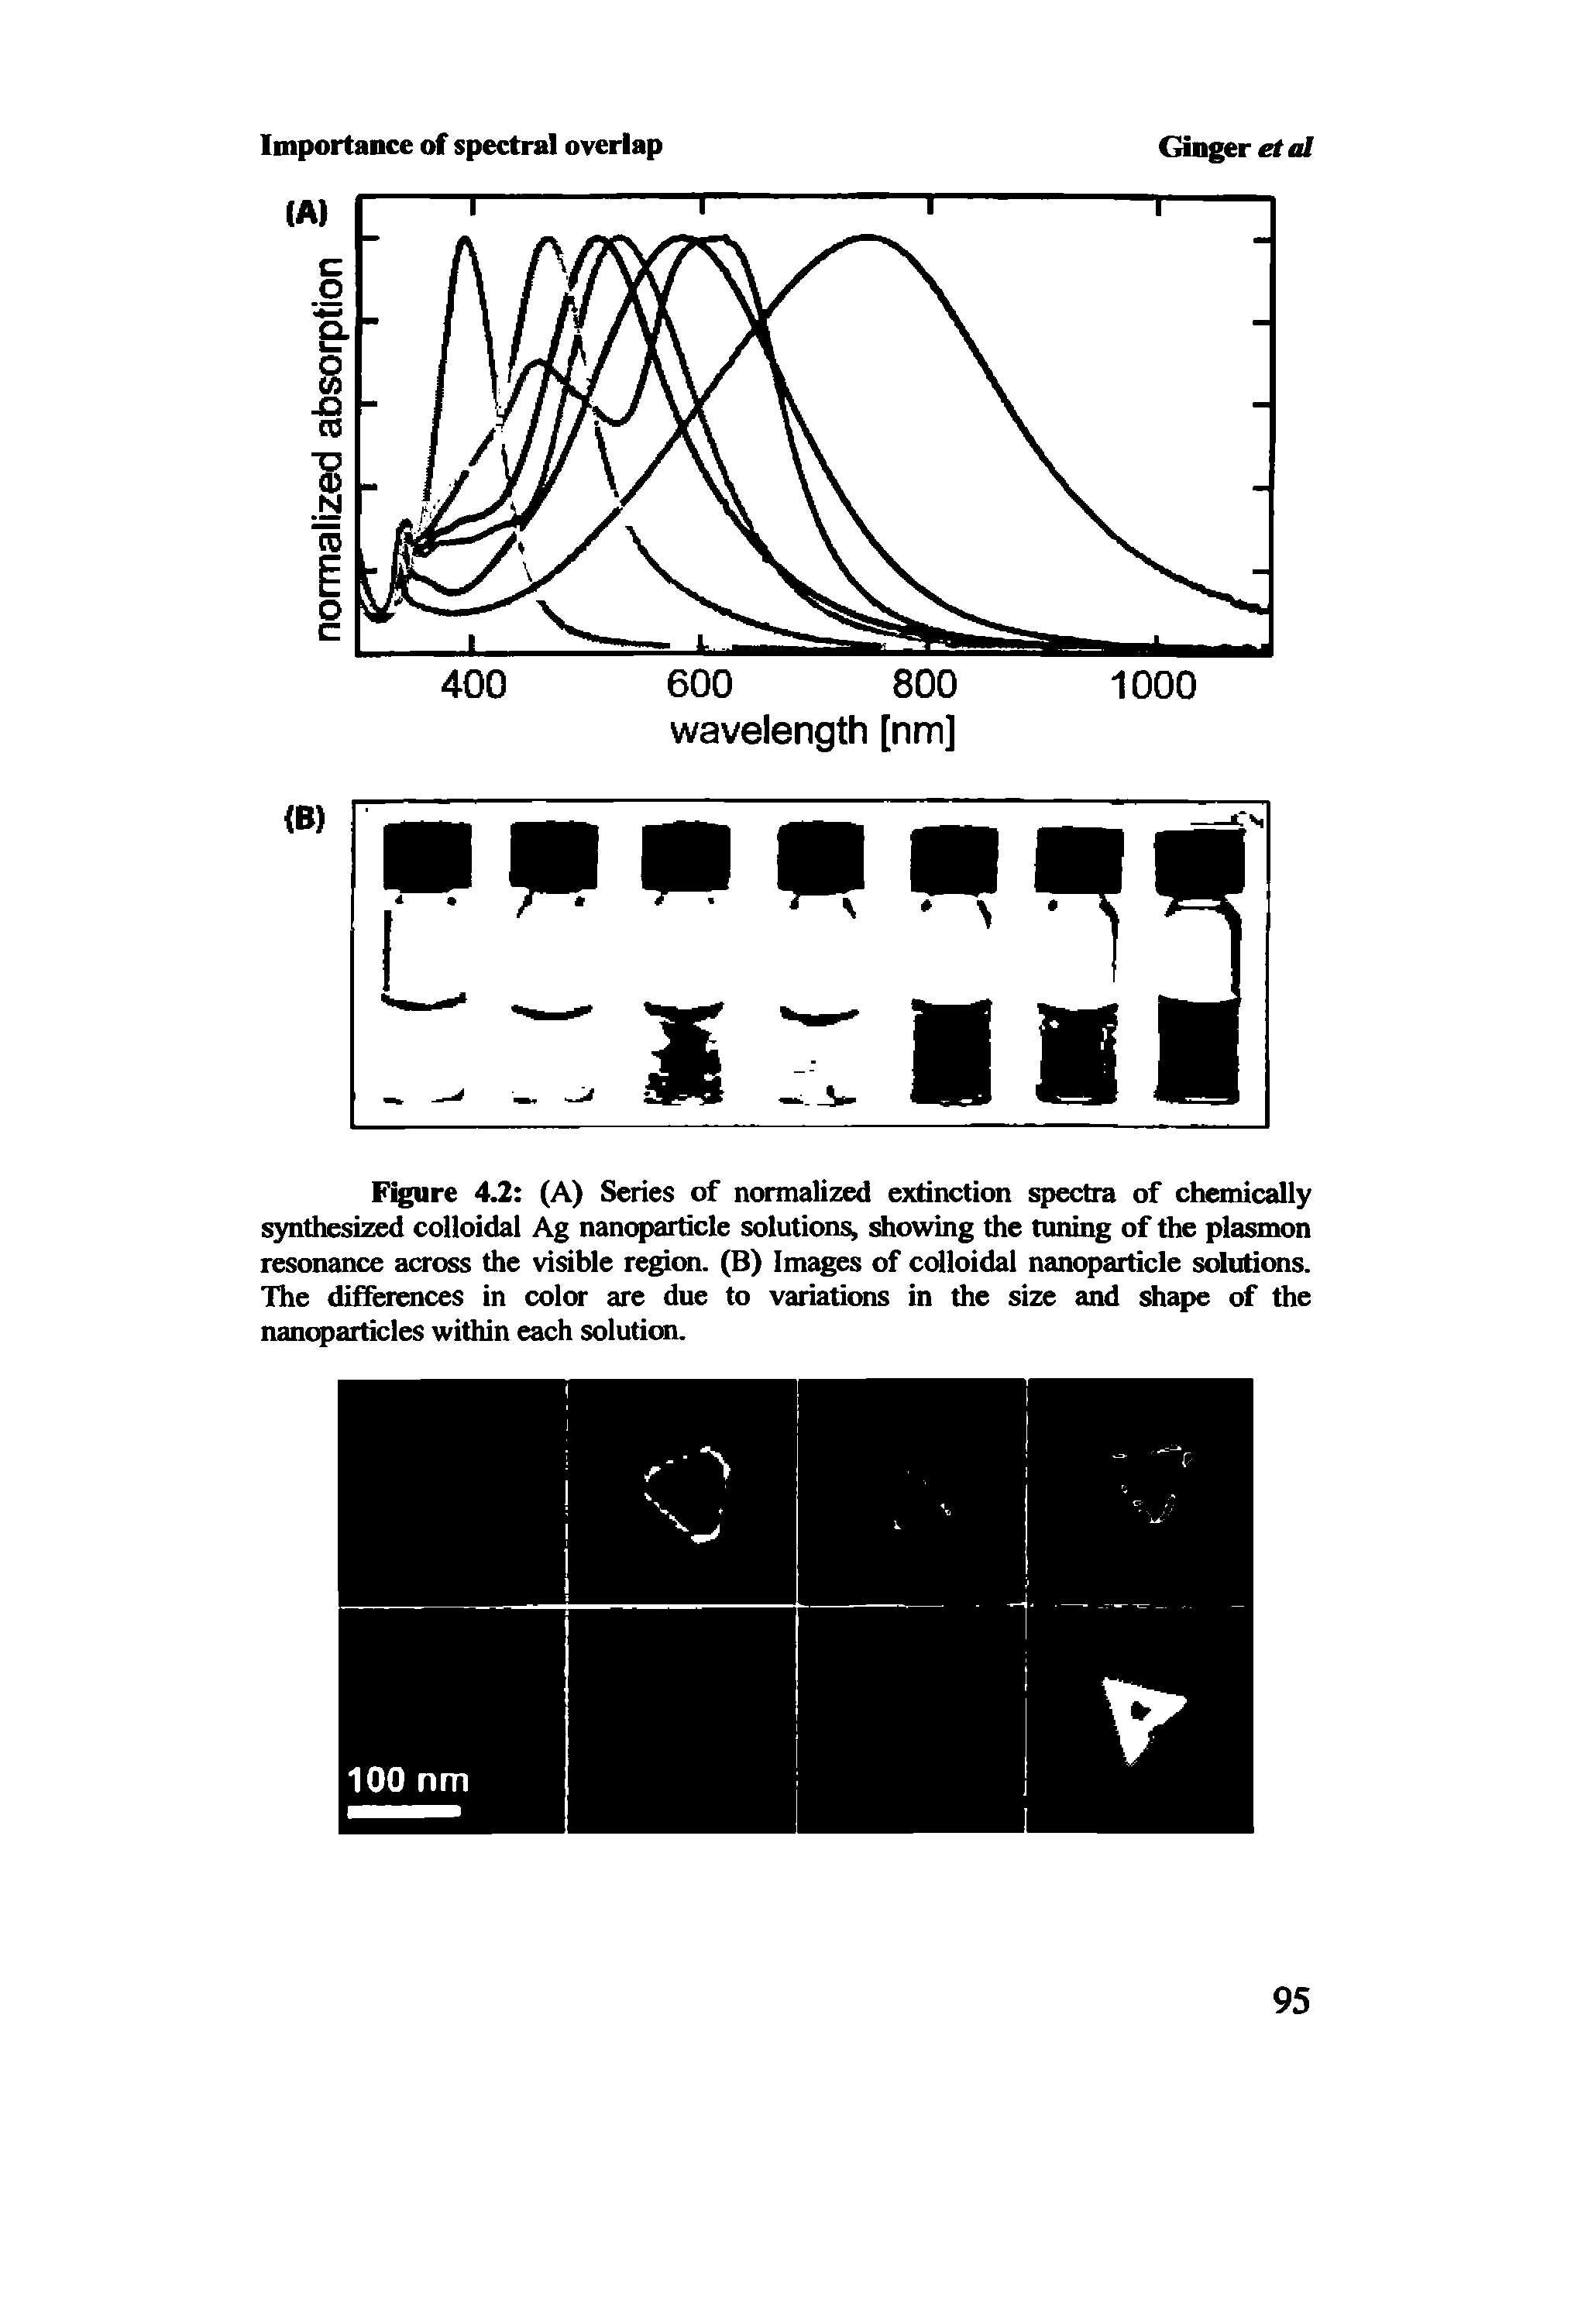 Figure 4.2 (A) Series of normalized extinction spectra of chemically synthesized colloidal Ag nanoparticle solution showing the tuning of the plasmon resonance across the visible region. (B) Images of colloidal nanoparticle solutions. The differences in color are due to variations in the size and shape of the nanoparticles within each solution.